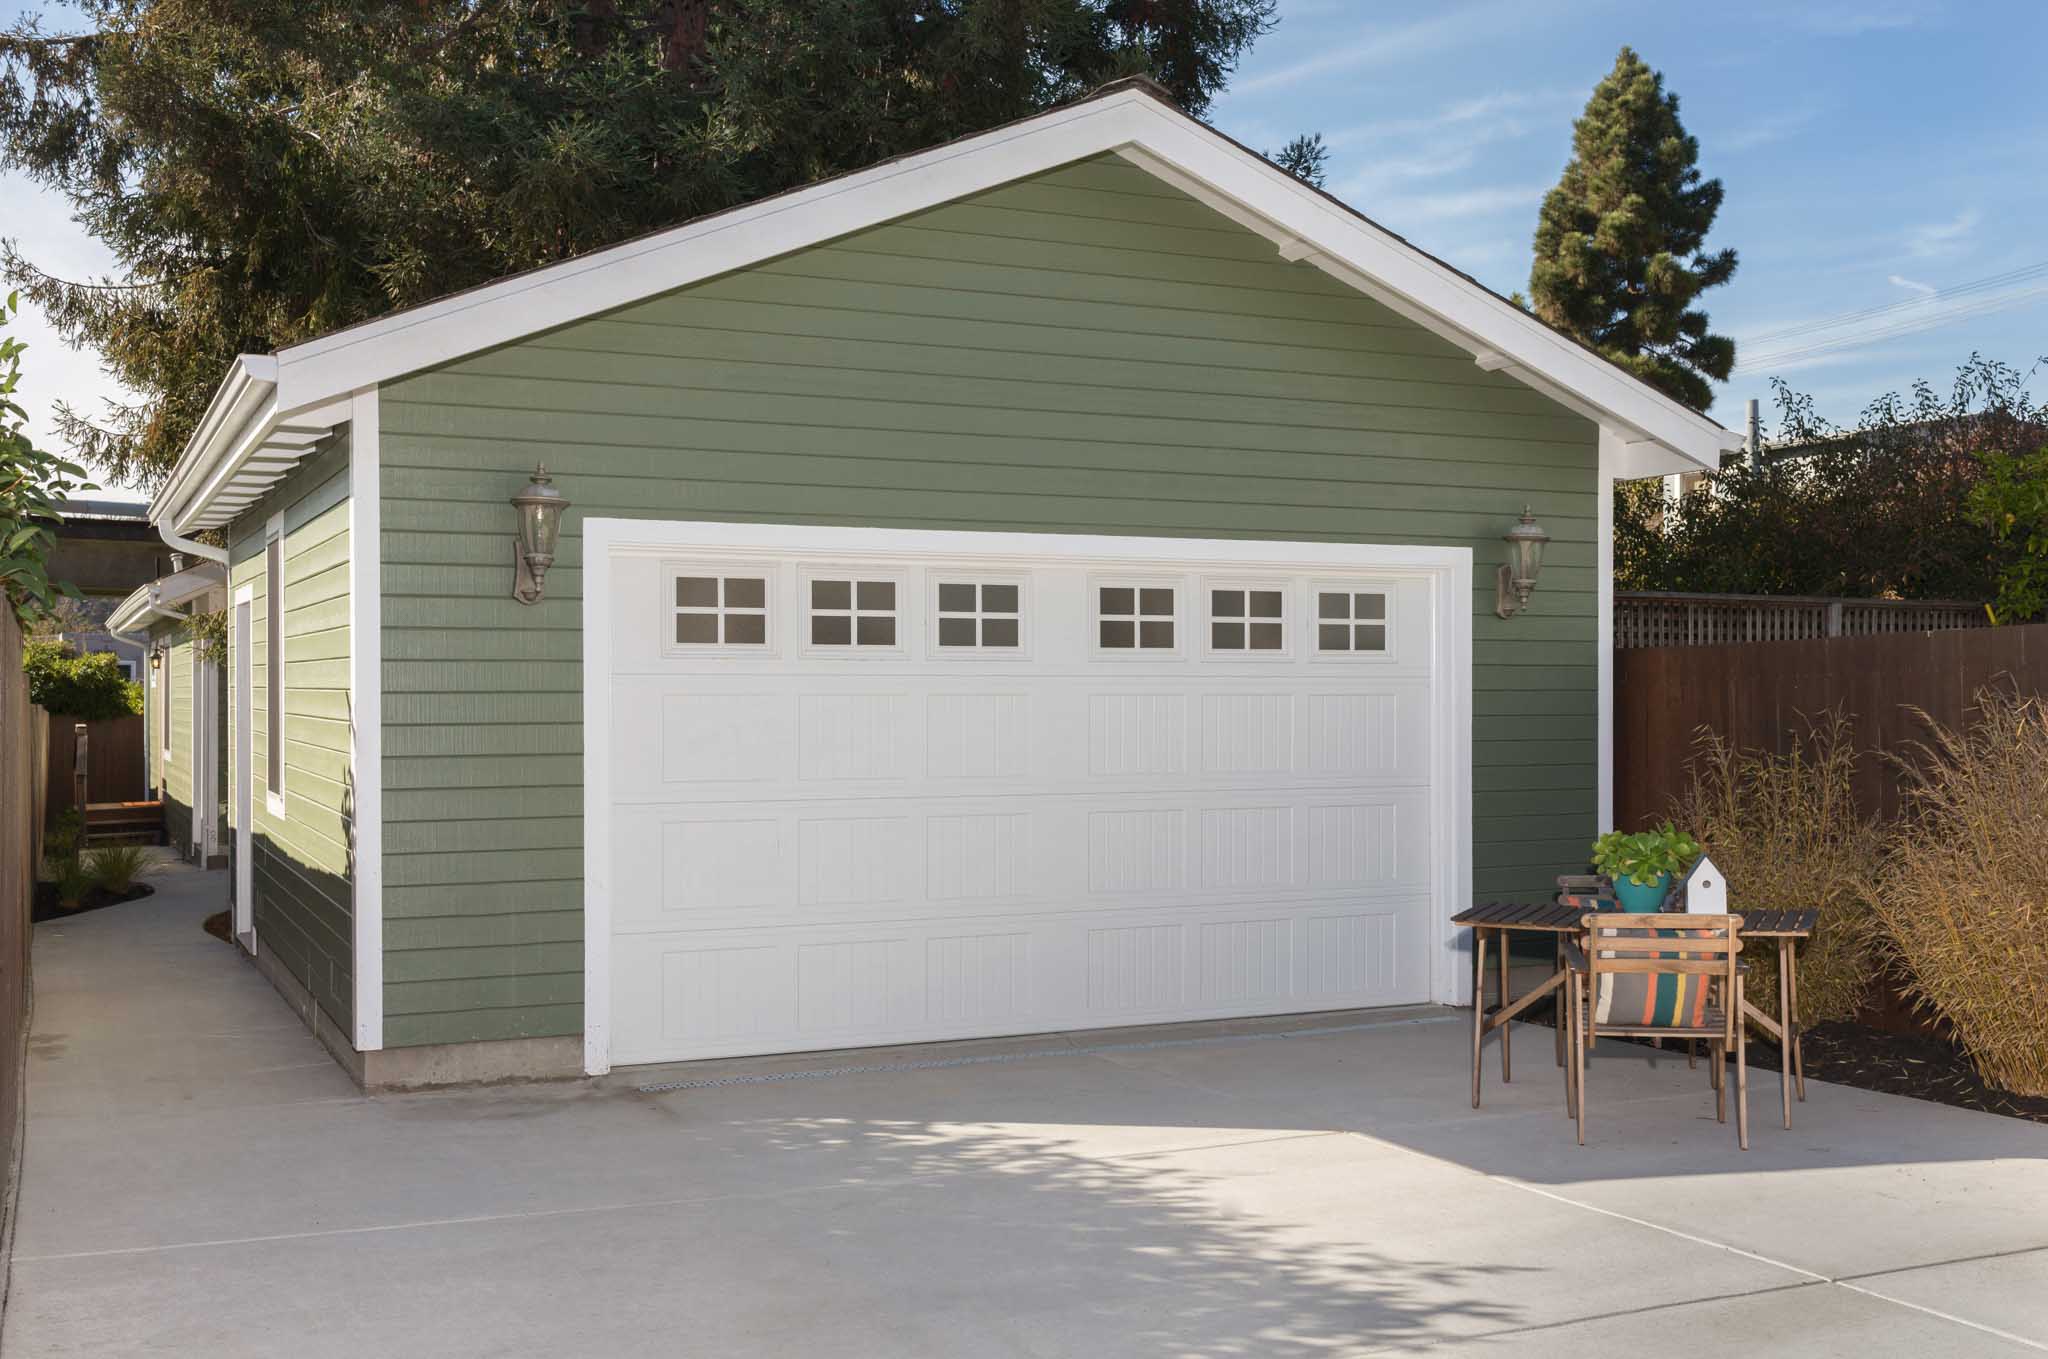 A recently remodeled garage, contact us for garage insulation.